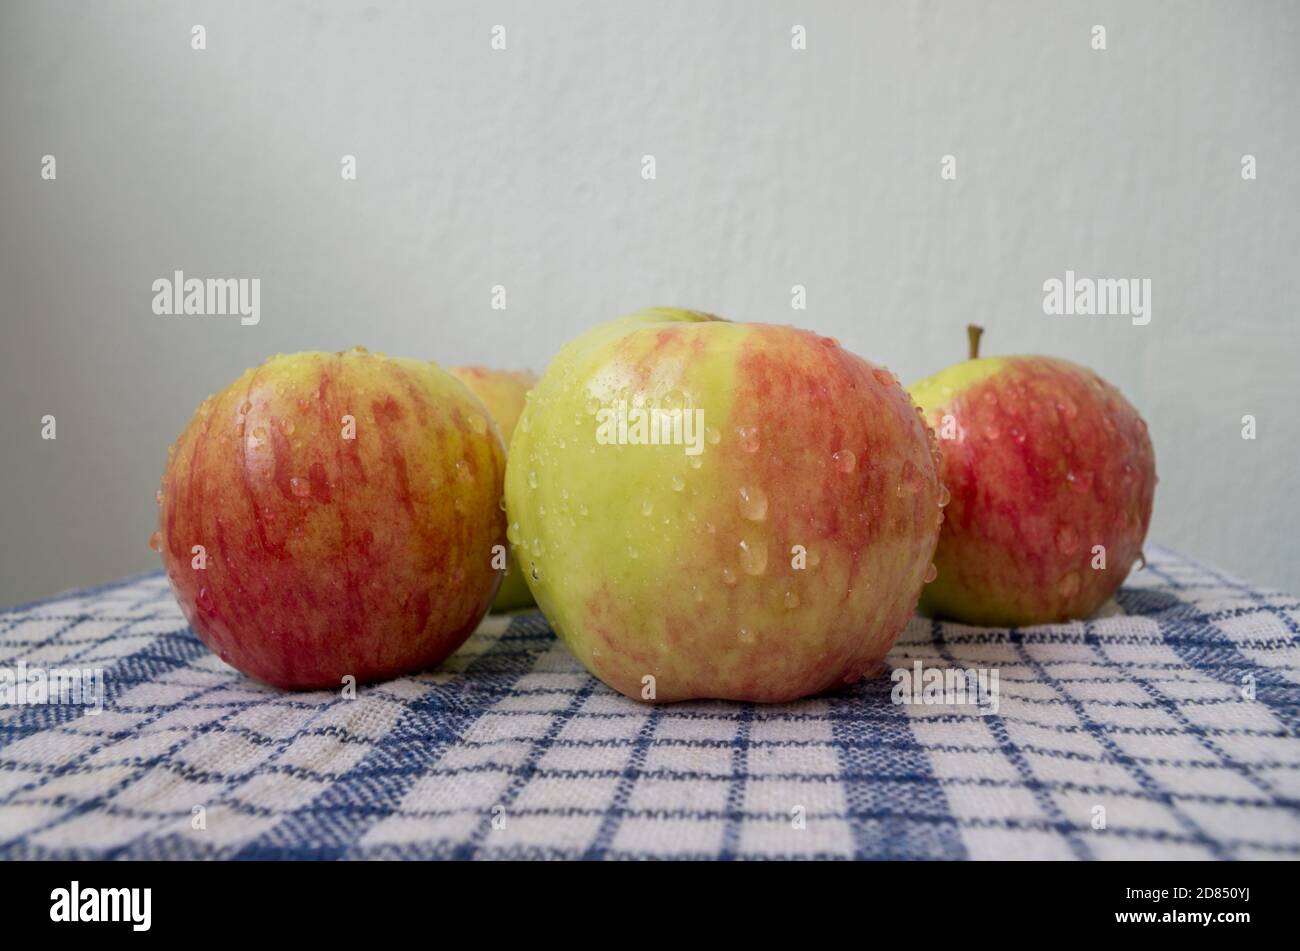 Pile of washed red-green apples, with water drops on peel, lying picturesquely on white waffle fabric tablecloth checkered with blue color stripes. Stock Photo